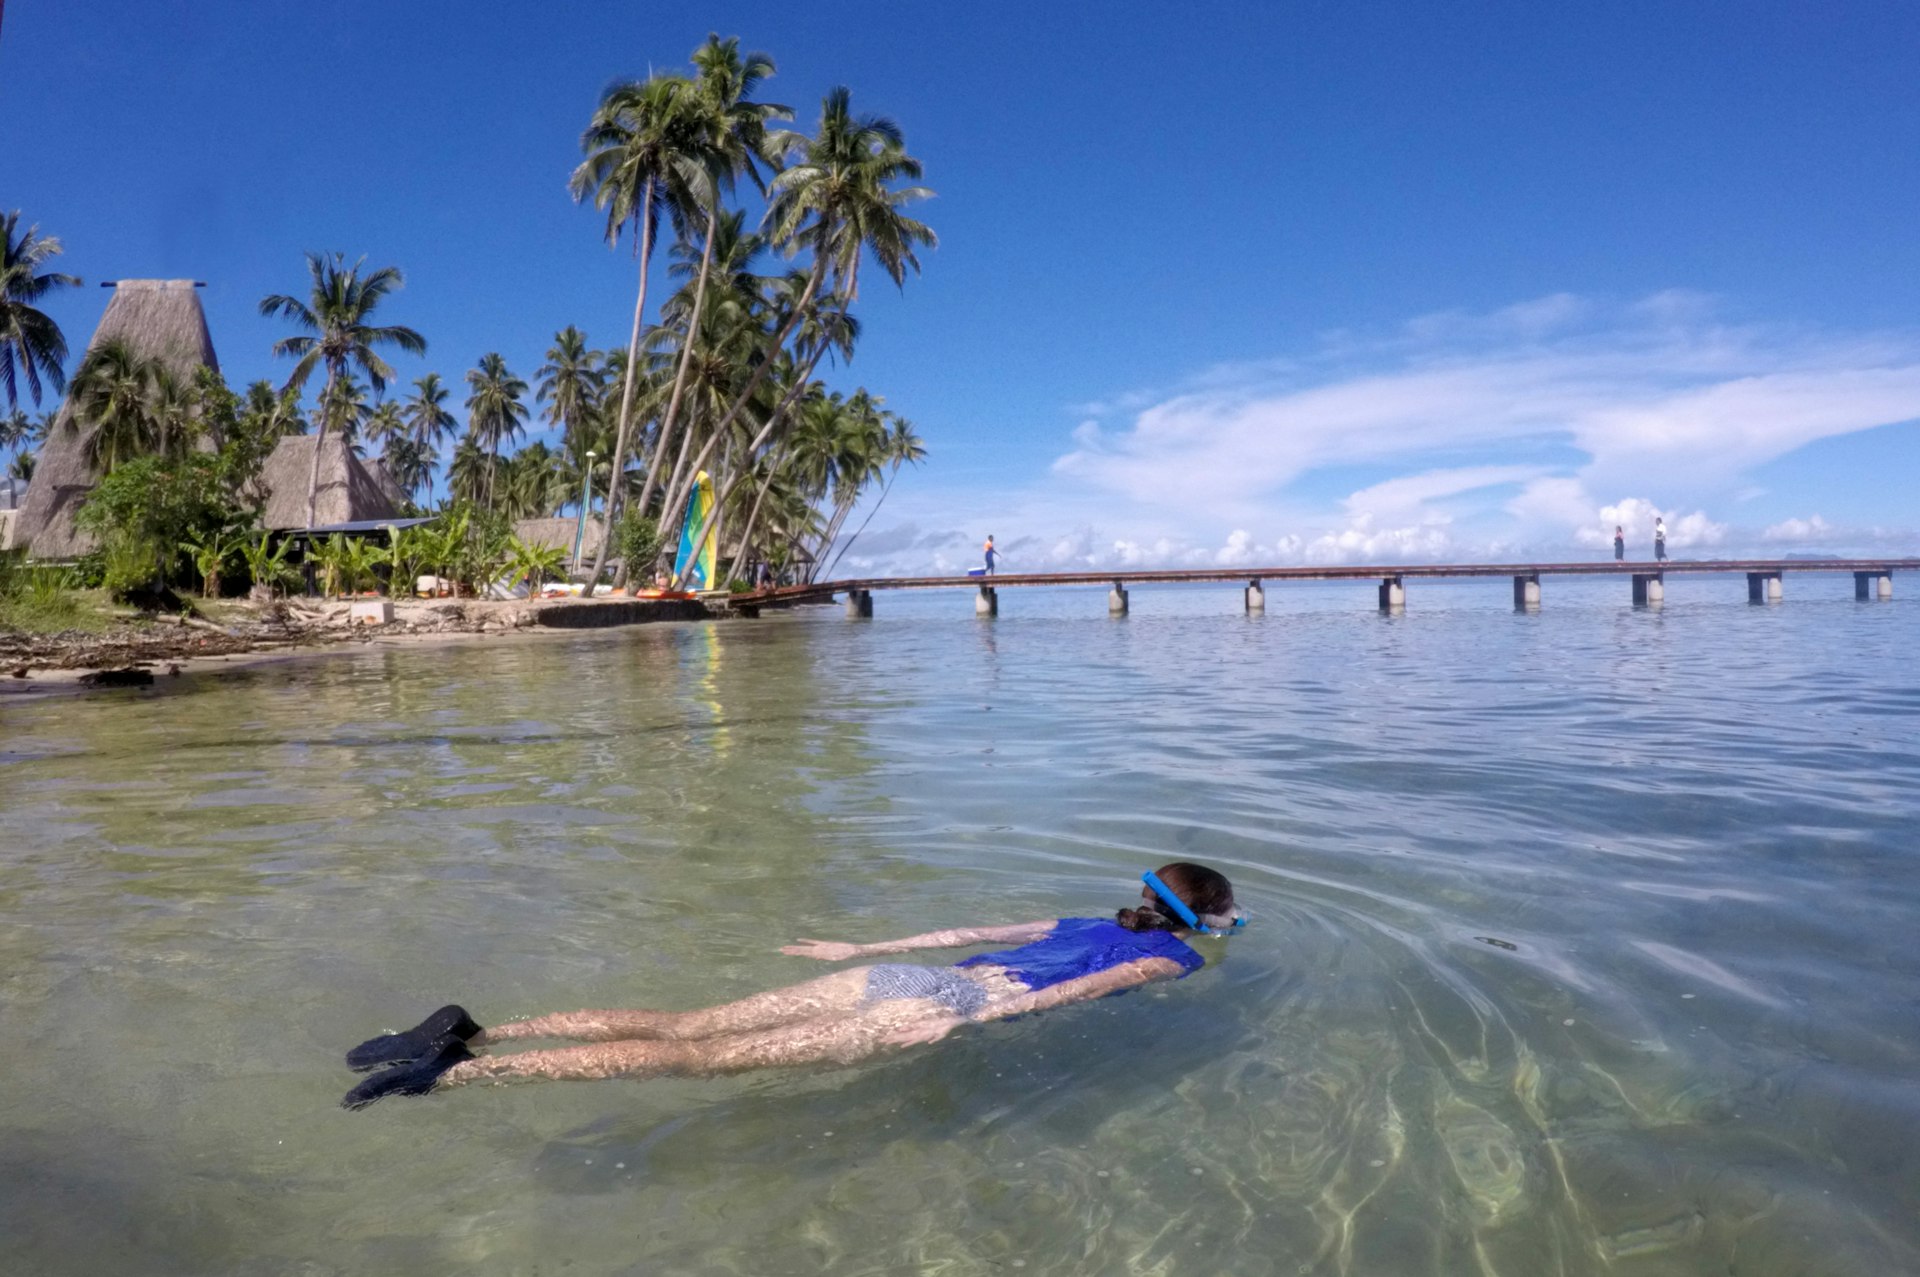 A woman snorkels in the waters off a tropical island